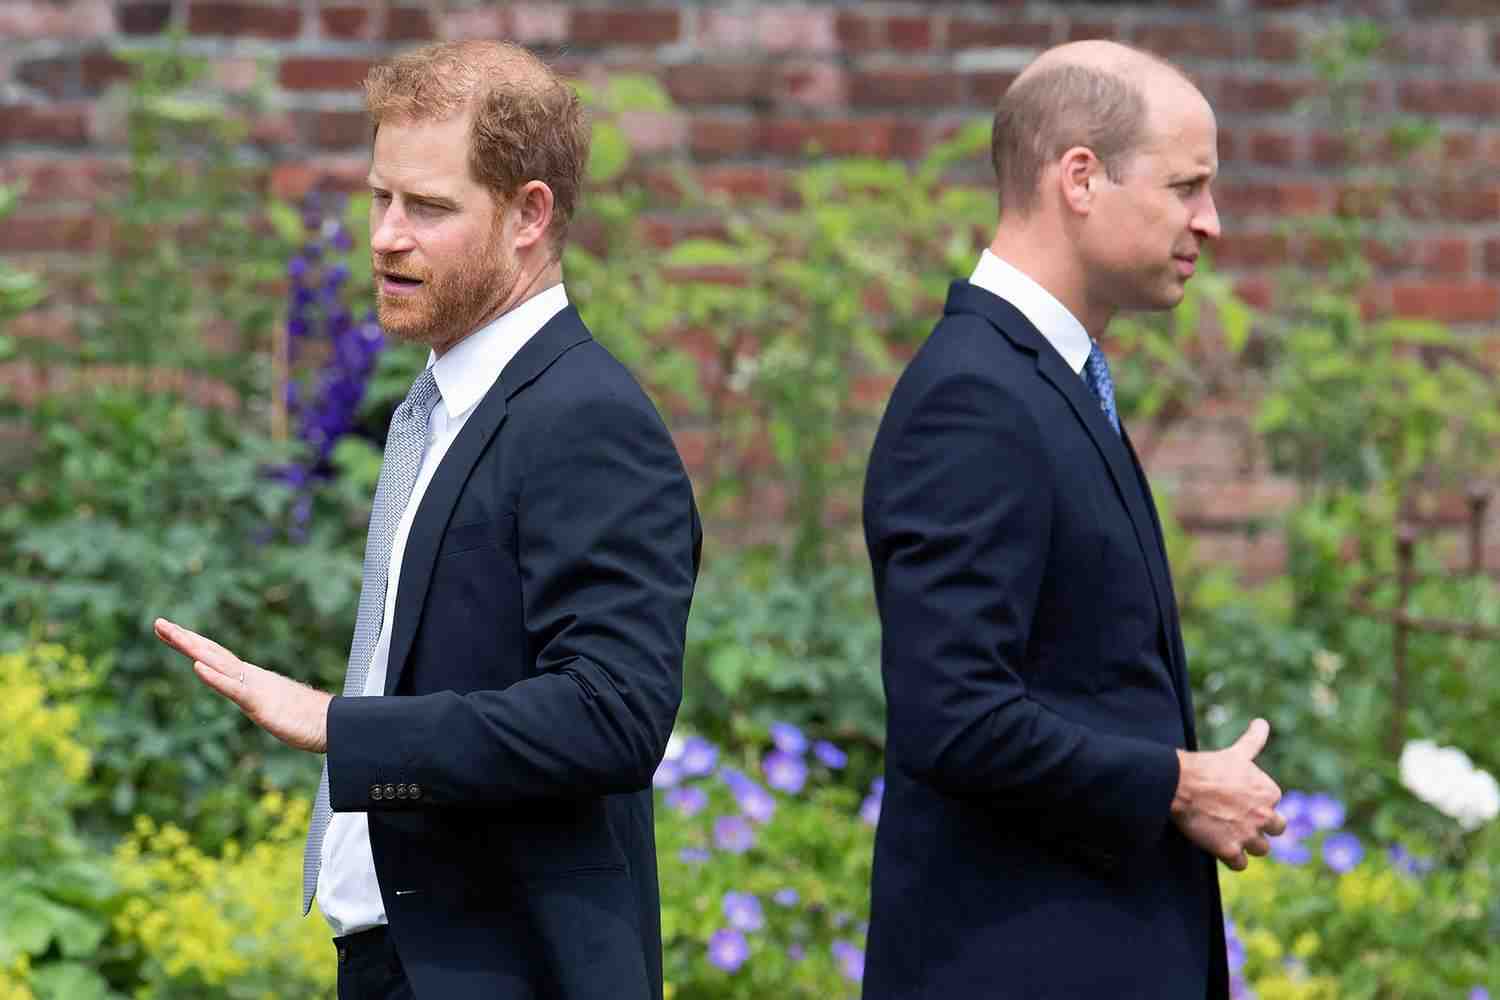 Harry's love life on the rocks, again? Brew a heady royal cuppa and unpick the tangled tale of the 'prince harry divorce' saga. Expect plot twists aplenty!